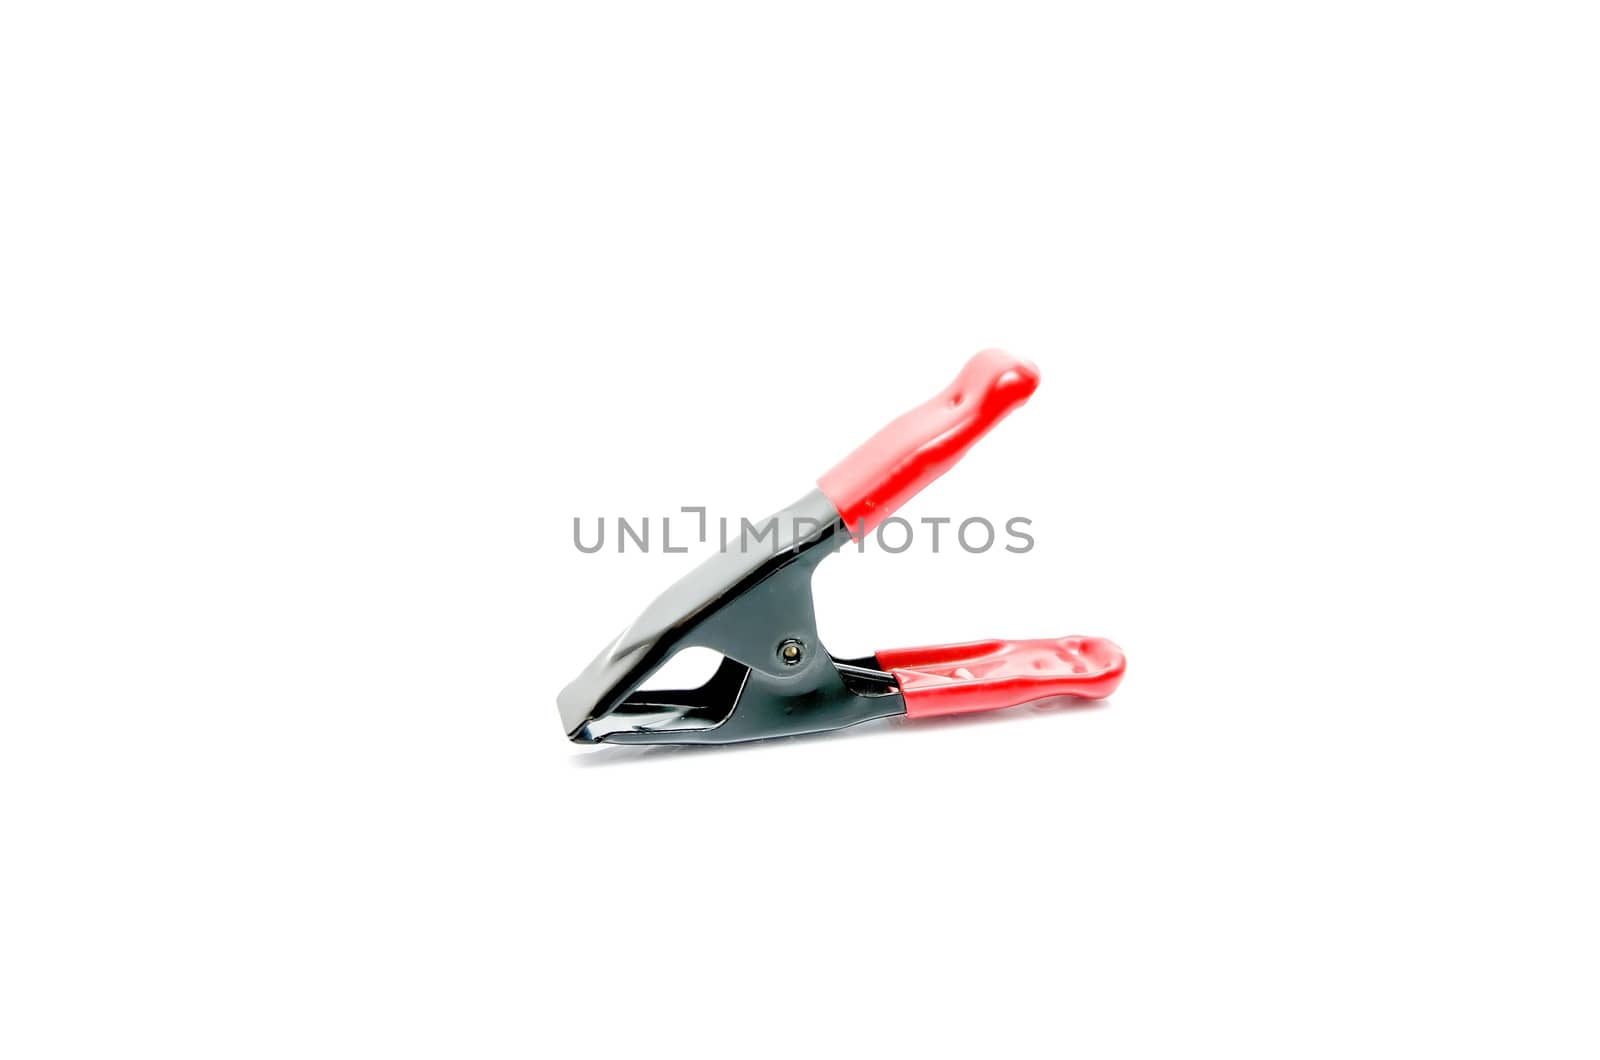 Isolated Electronic Plier, Steel Tools